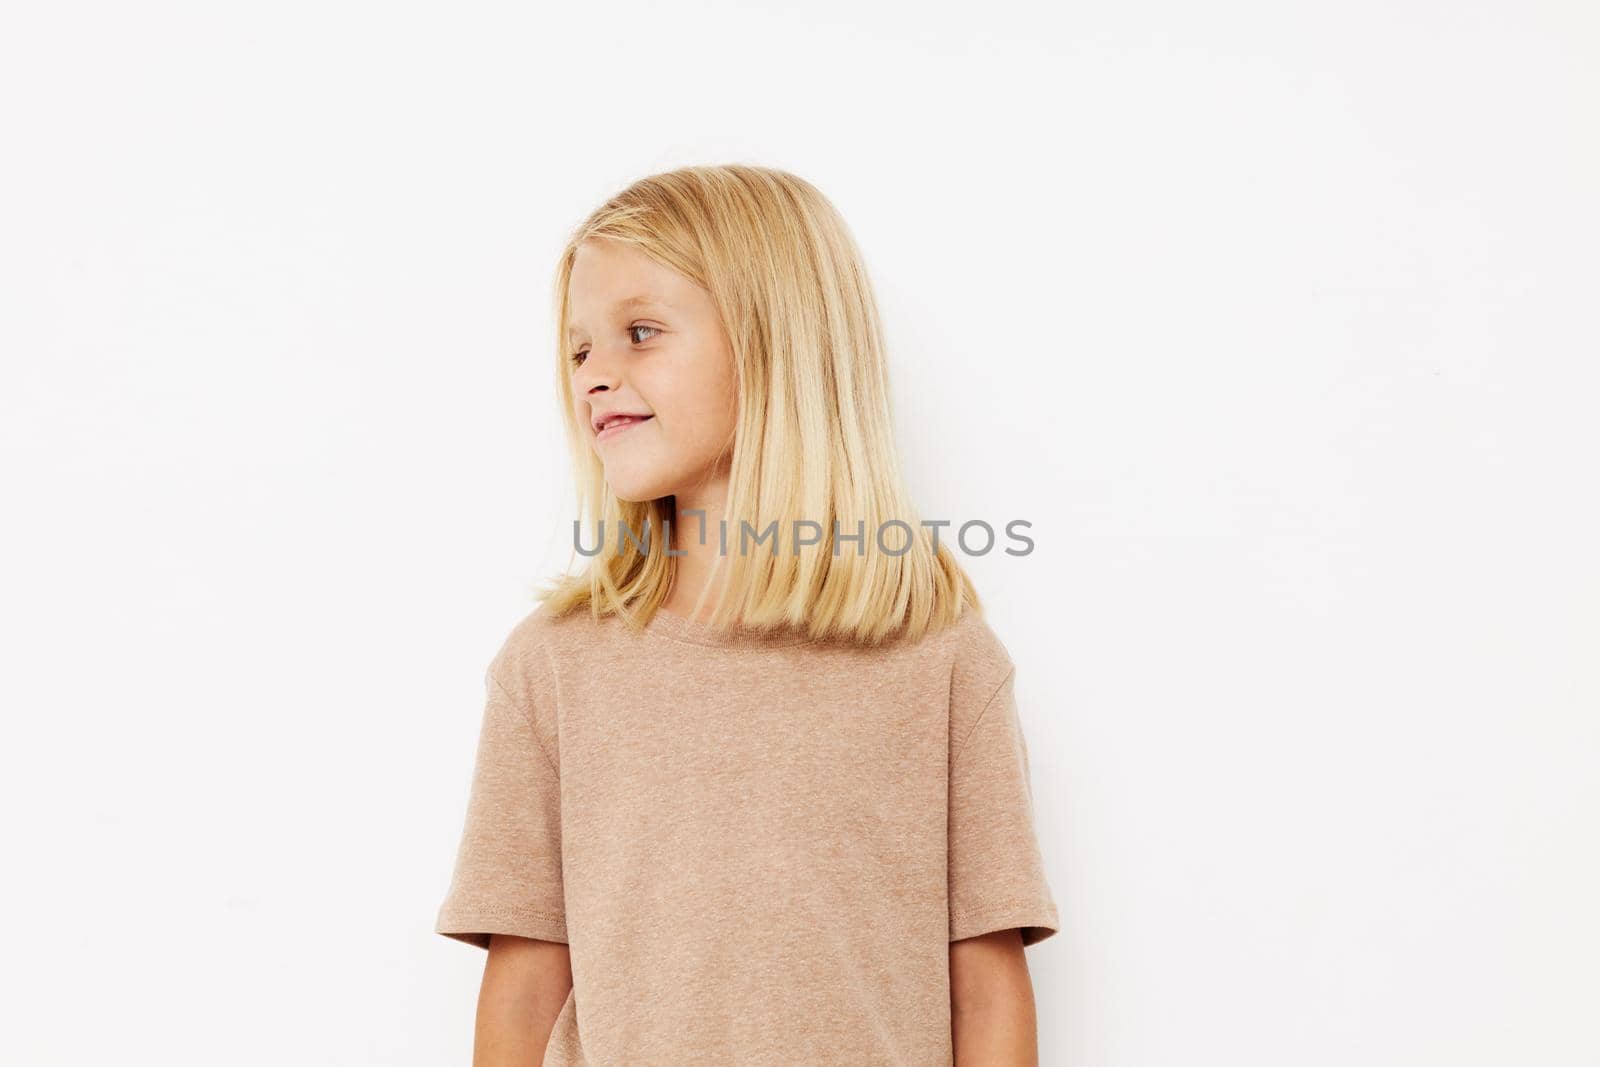 Portrait of a smiling little cutie in a beige t-shirt lifestyle concept by SHOTPRIME